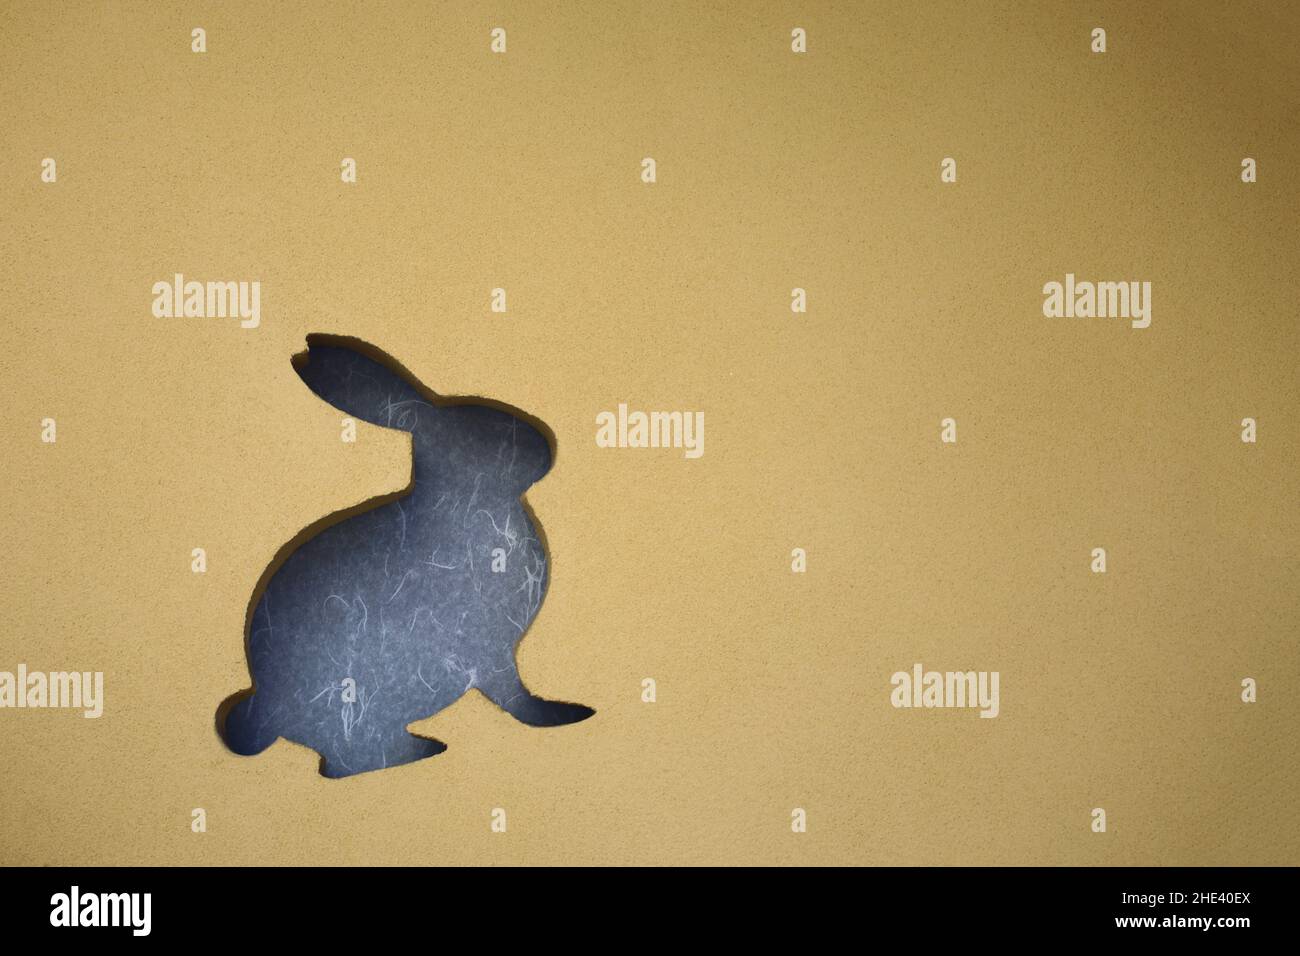 Diatomaceous earth wall with a stamped rabbit silhouette Stock Photo